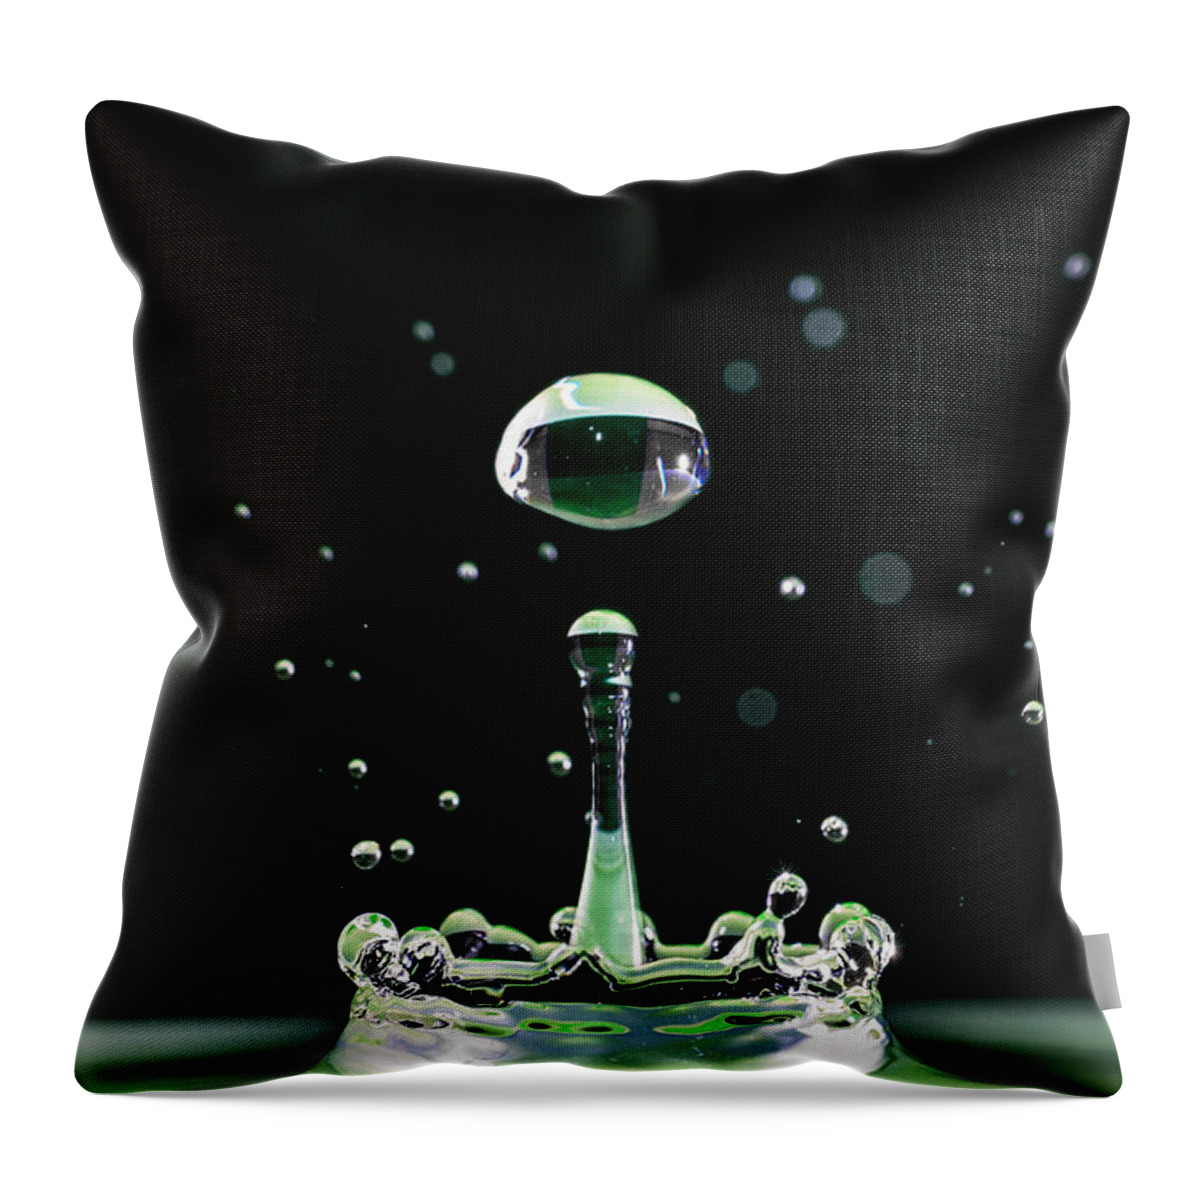 Purity Throw Pillow featuring the photograph Green Drops by Cristian Ghisla